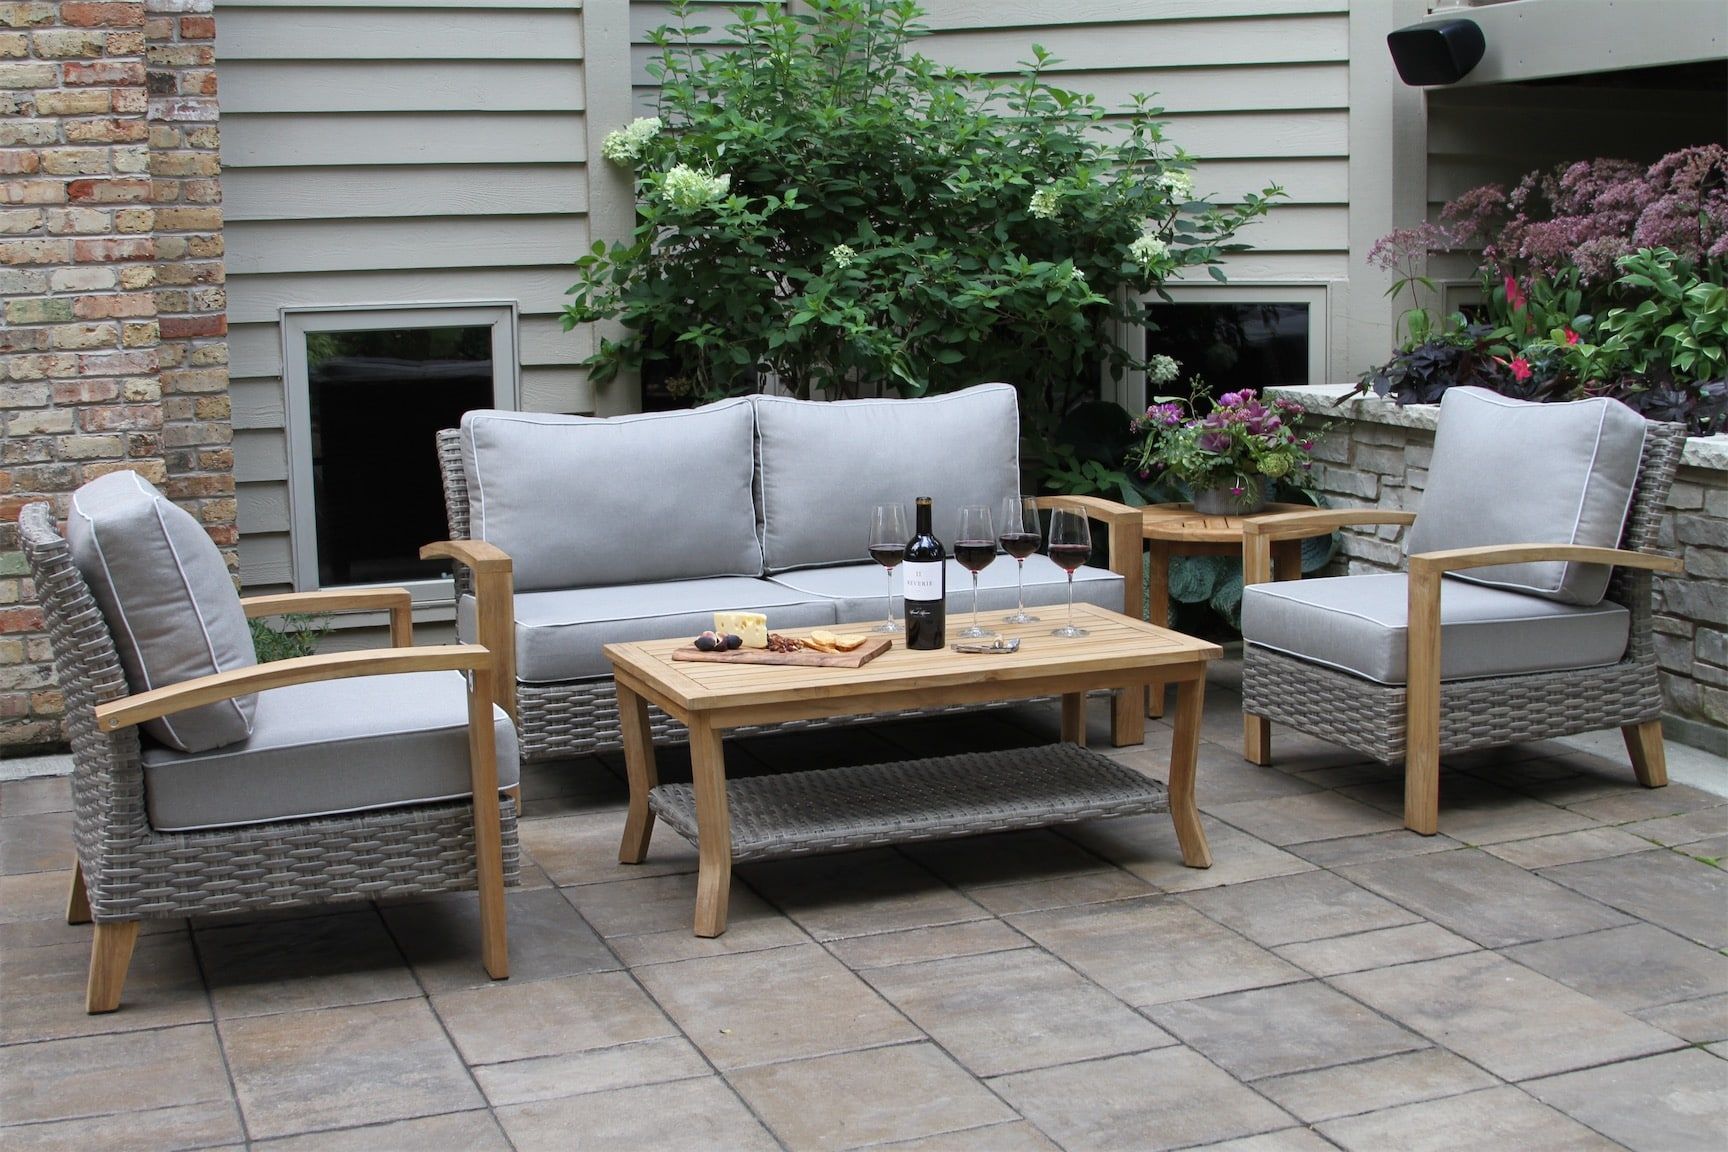 Outdoor Interiors Teak & Wicker Love Seat, 2 Arm Chairs & Coffee Table With  Olefin | Agway Of Cape Cod Inside Outdoor 2 Arm Chairs And Coffee Table (View 3 of 15)